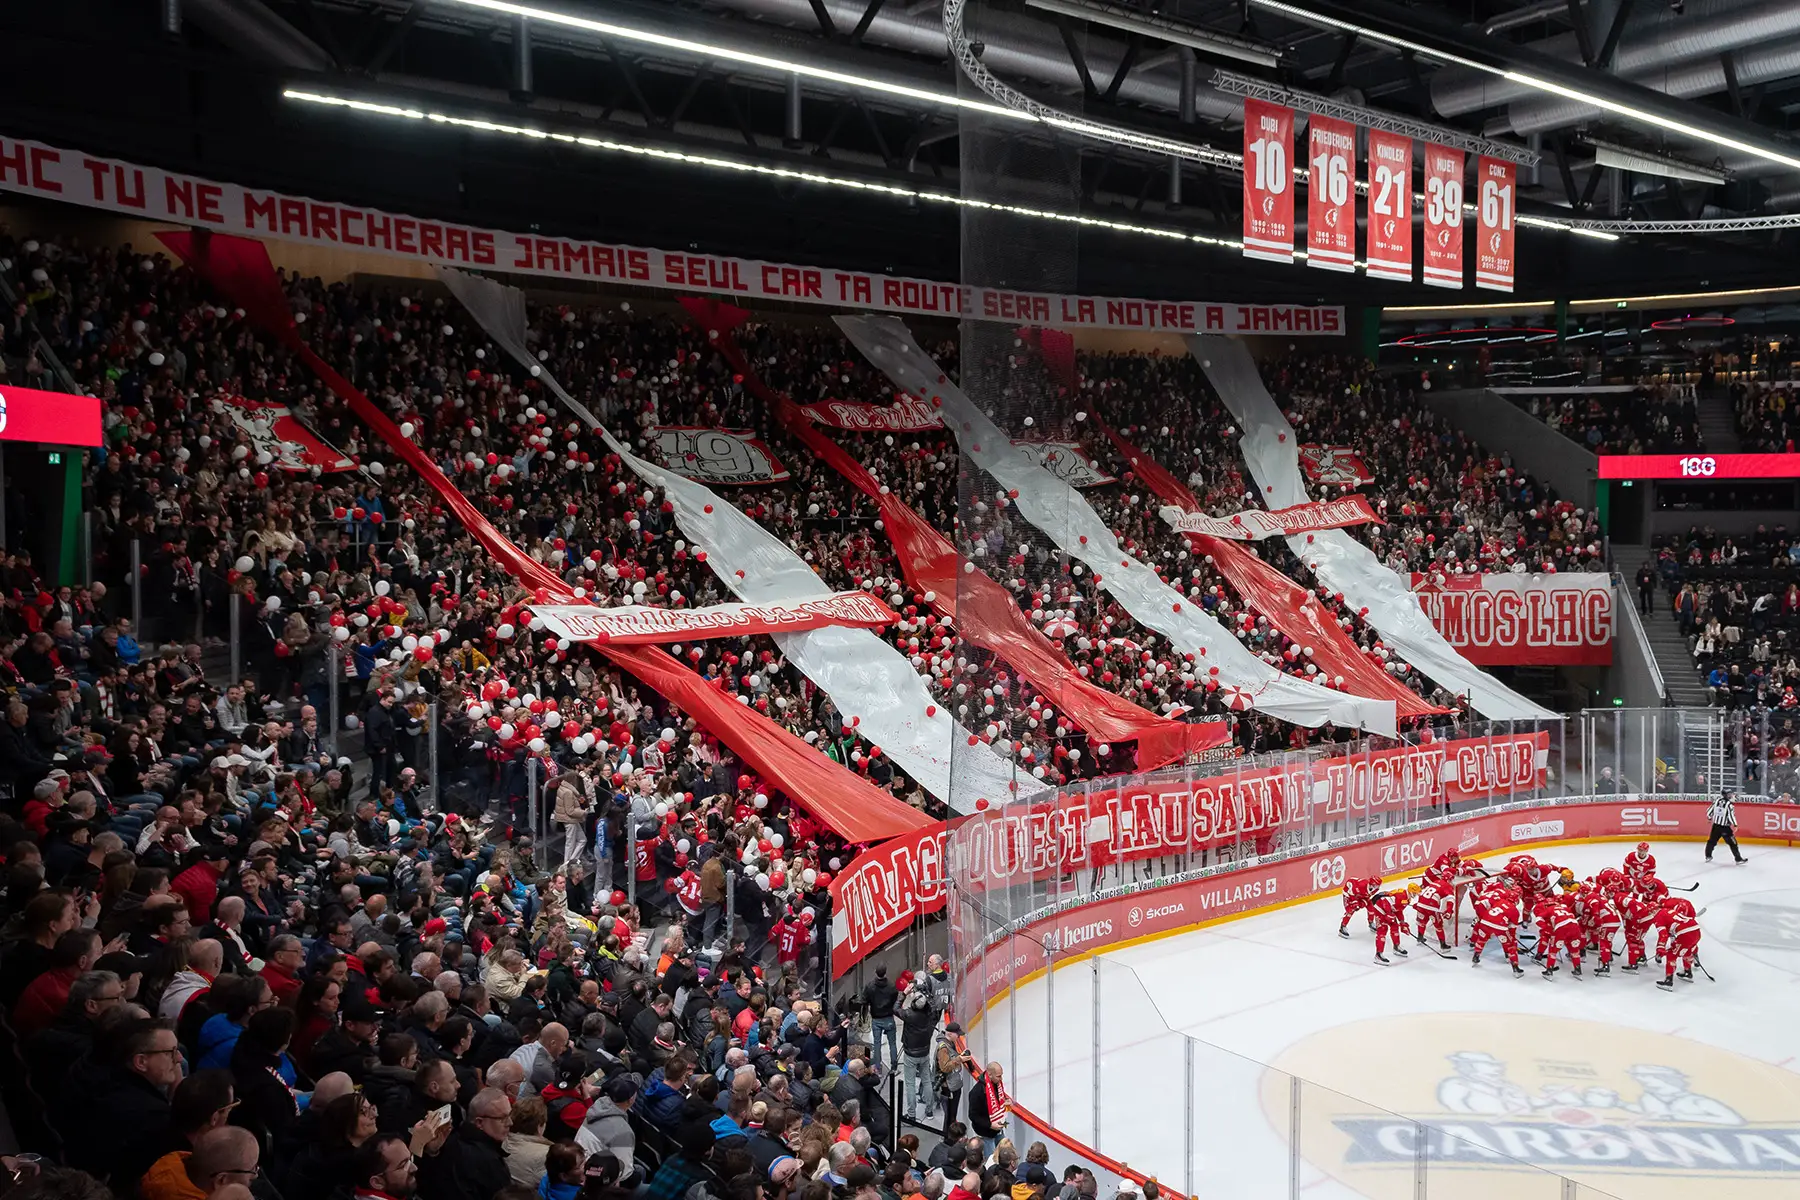 Supporters at a hockey game in Lausanne, Switzerland